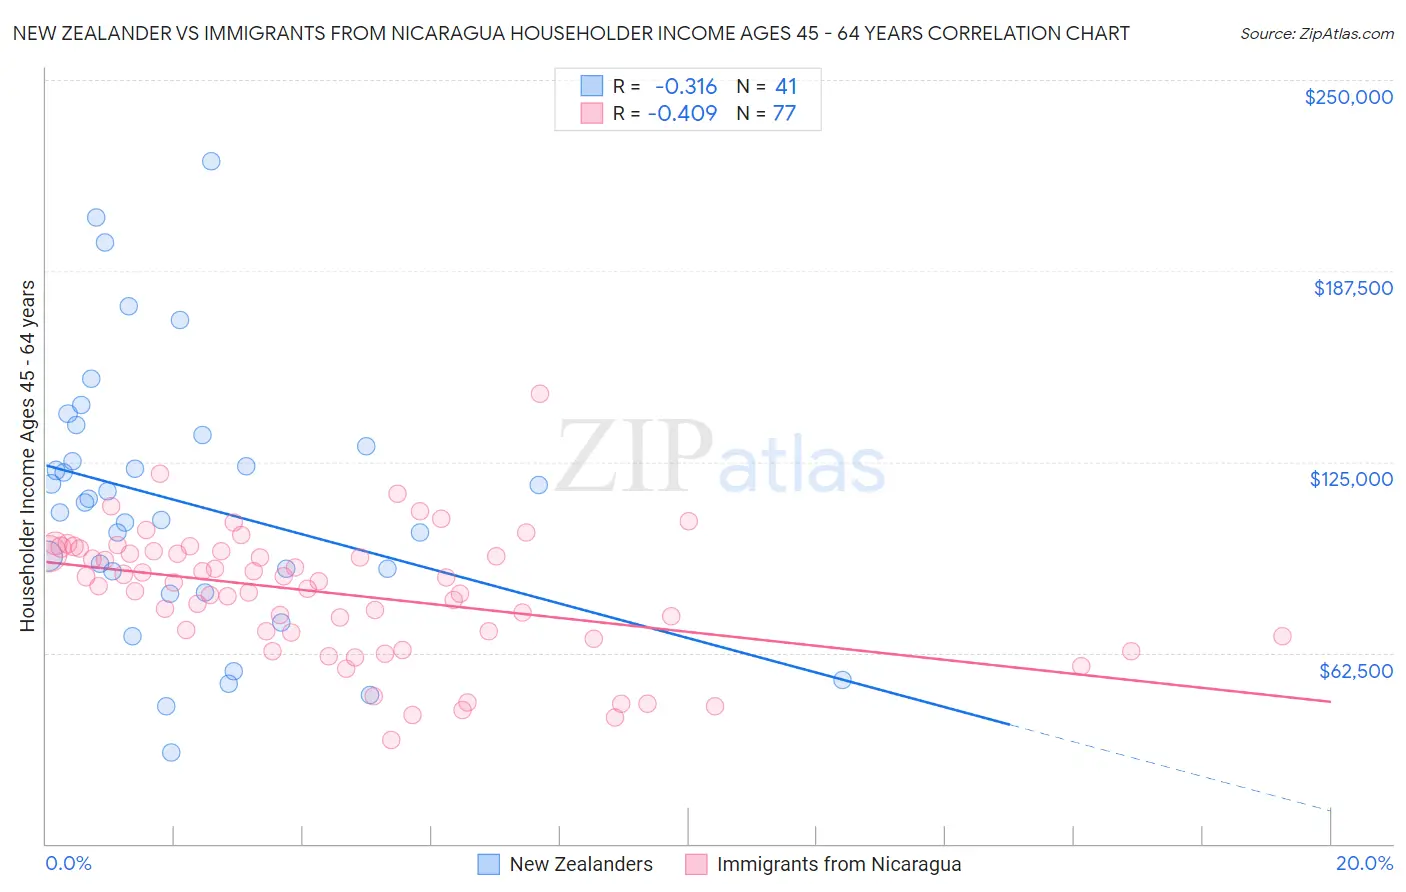 New Zealander vs Immigrants from Nicaragua Householder Income Ages 45 - 64 years